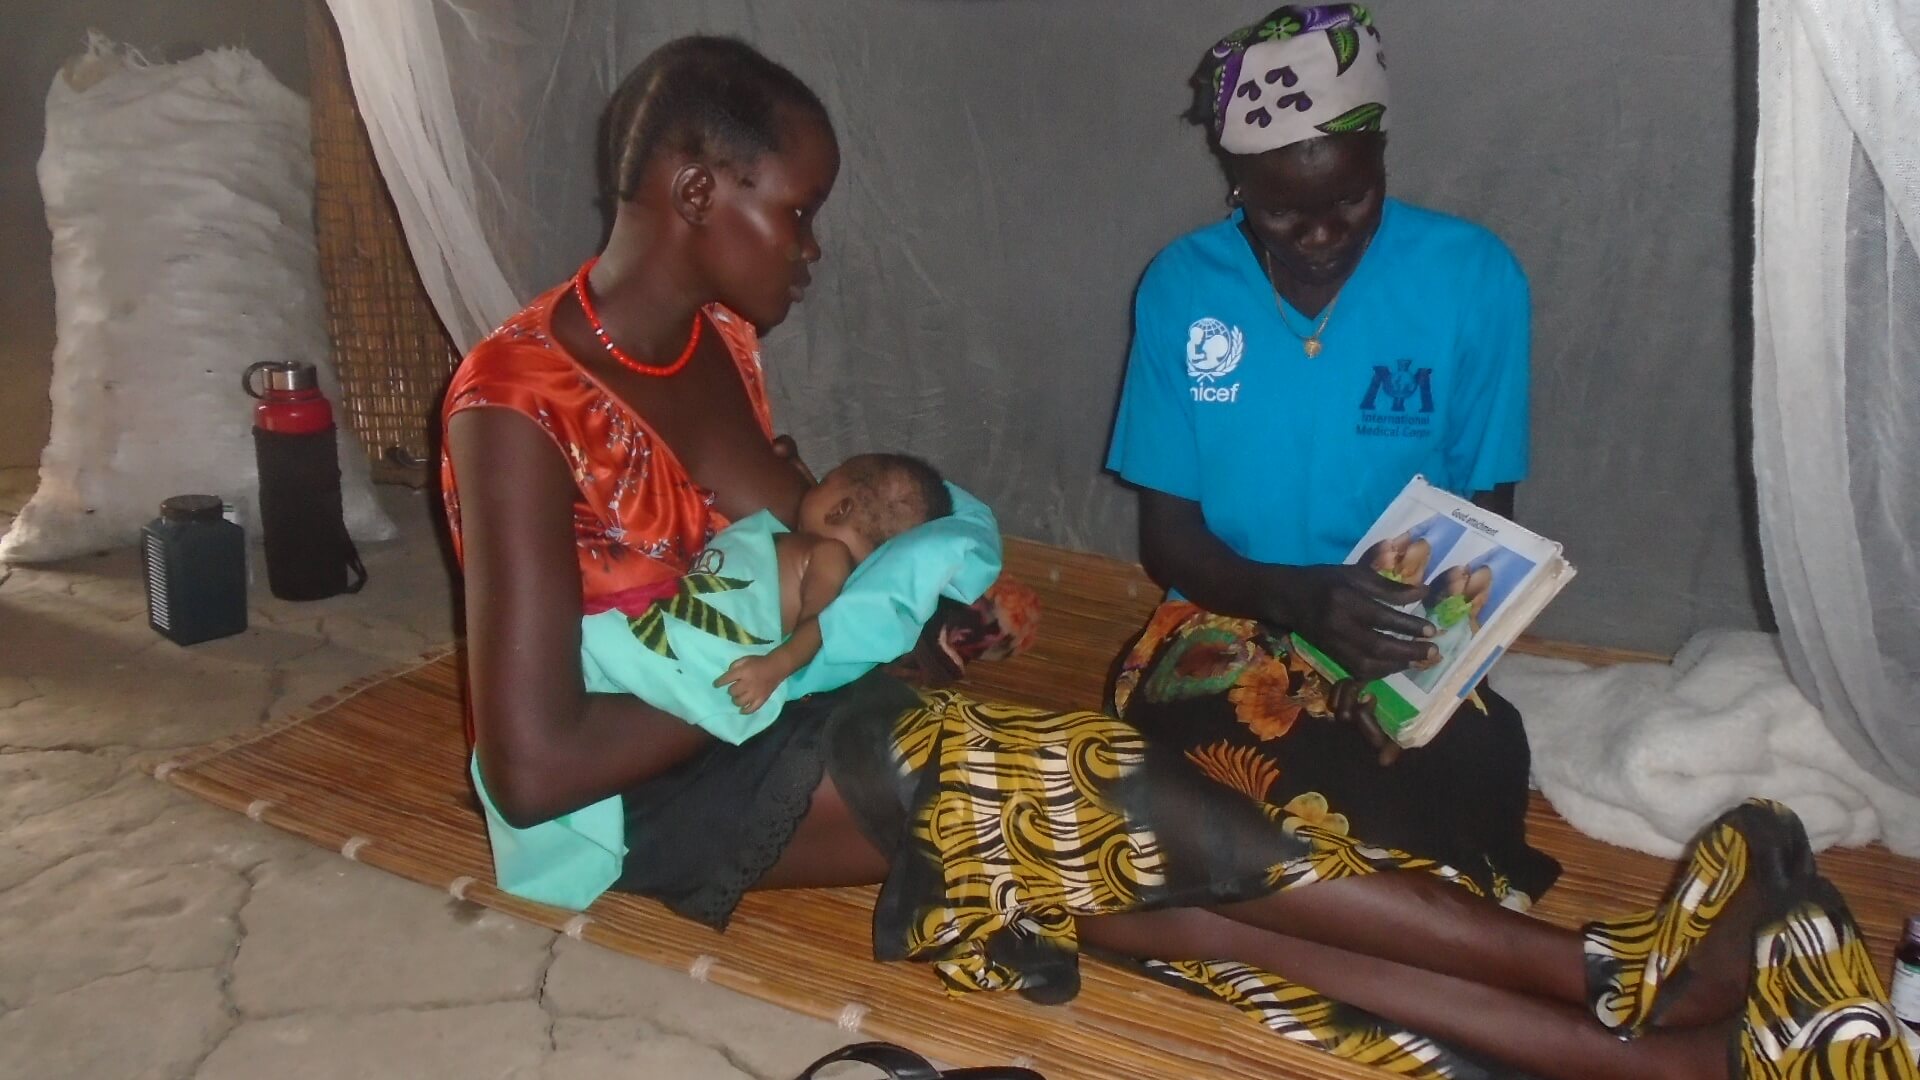 Nyakueth Dak, a leader mother trained in maternal, infant and young-child nutrition (MIYCN) by International Medical Corps, provides breastfeeding training to Nyayiena Mabieh.